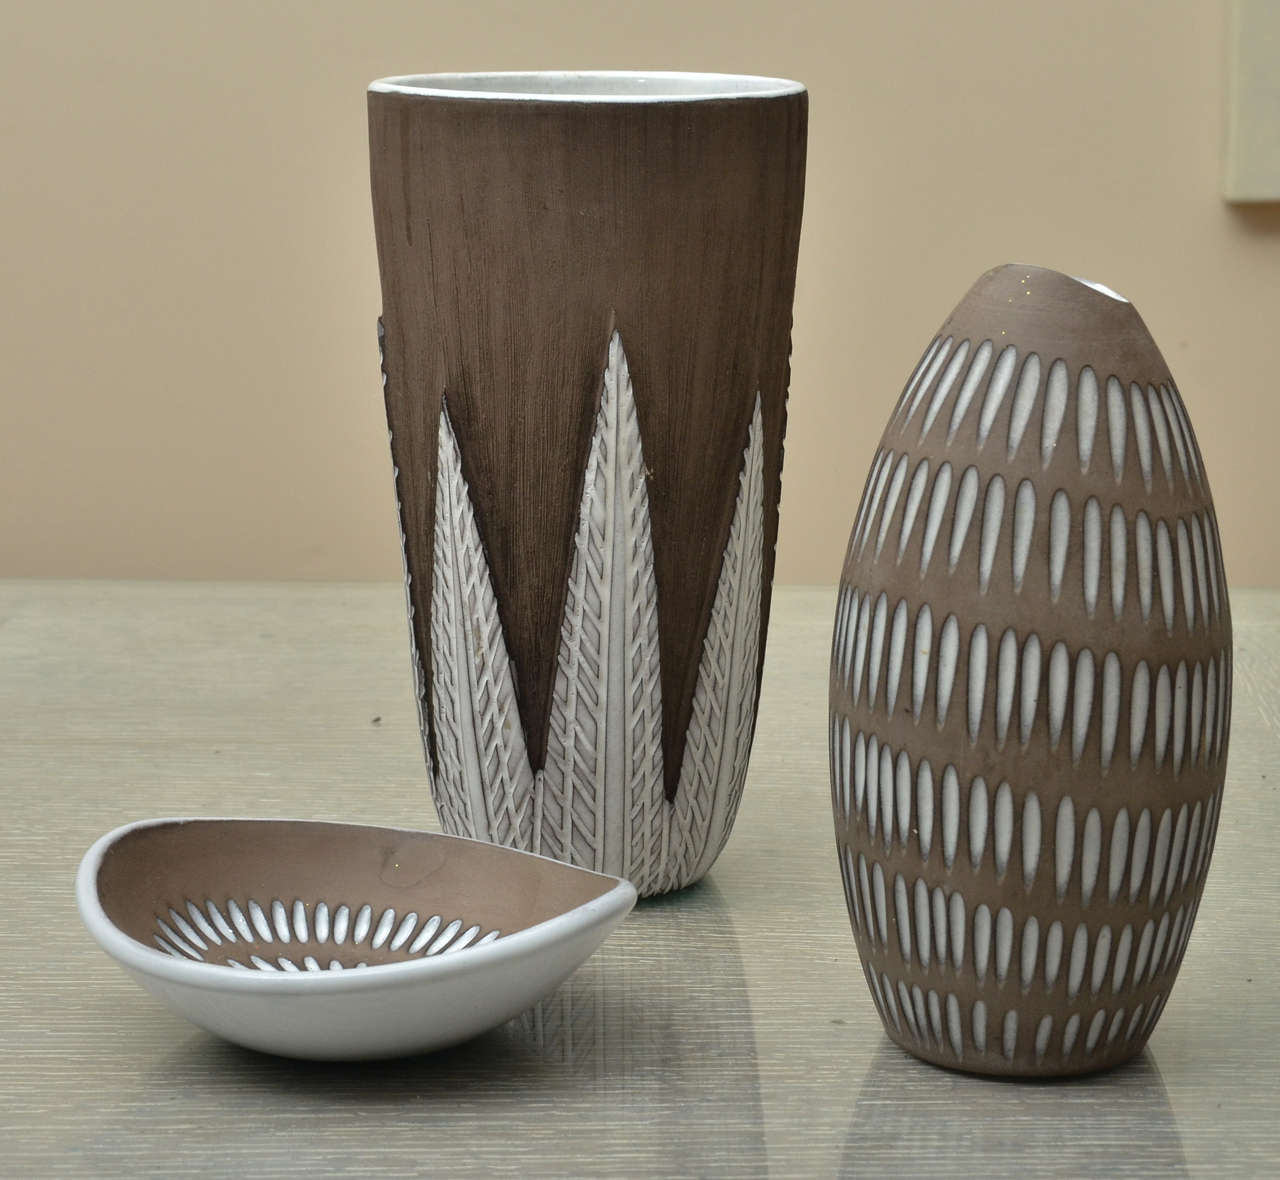 Group of 3 ceramics by Ekeby of Sweden.Bowl measurements are 5.25wide - 1.25 ht. Tall vase is 8.5 ht - 4.5 wide. Smaller vase is 7.25 ht - 3.5 wide. All signed